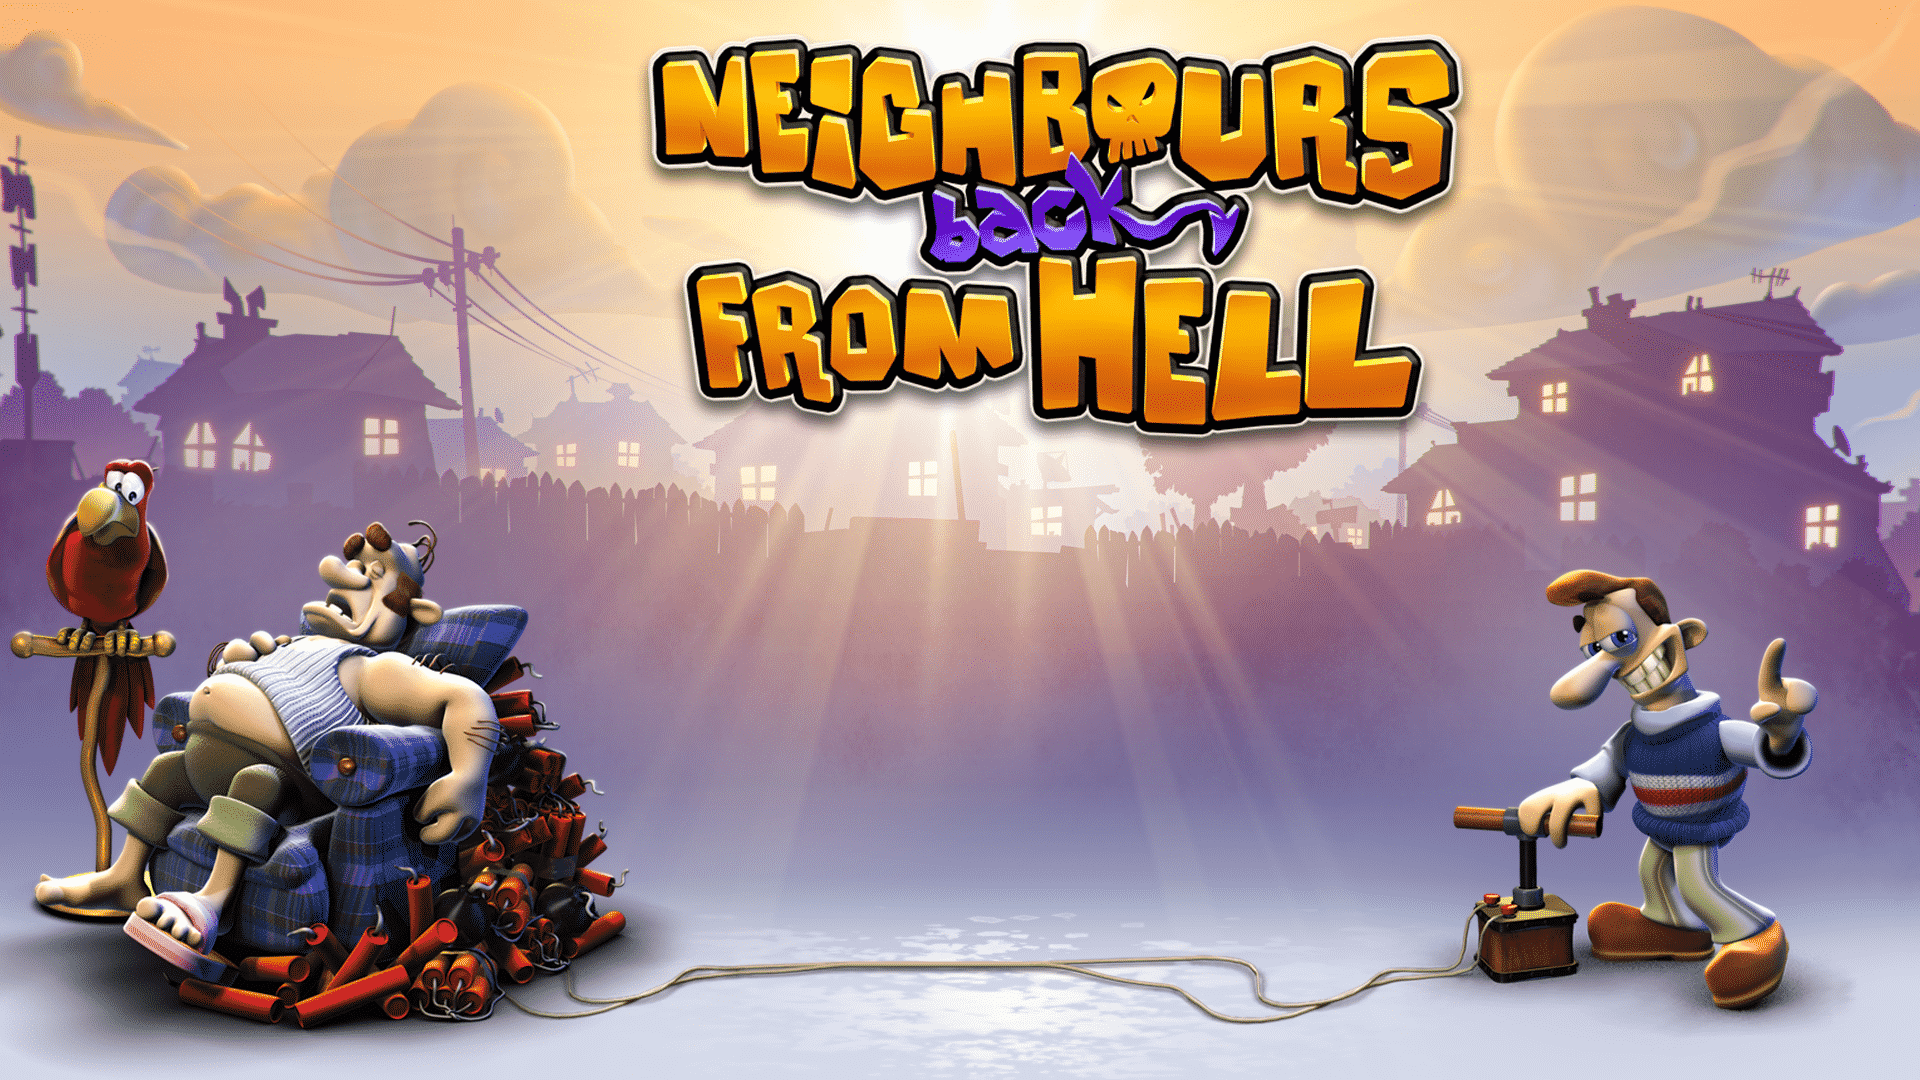 neighbours back from hell download